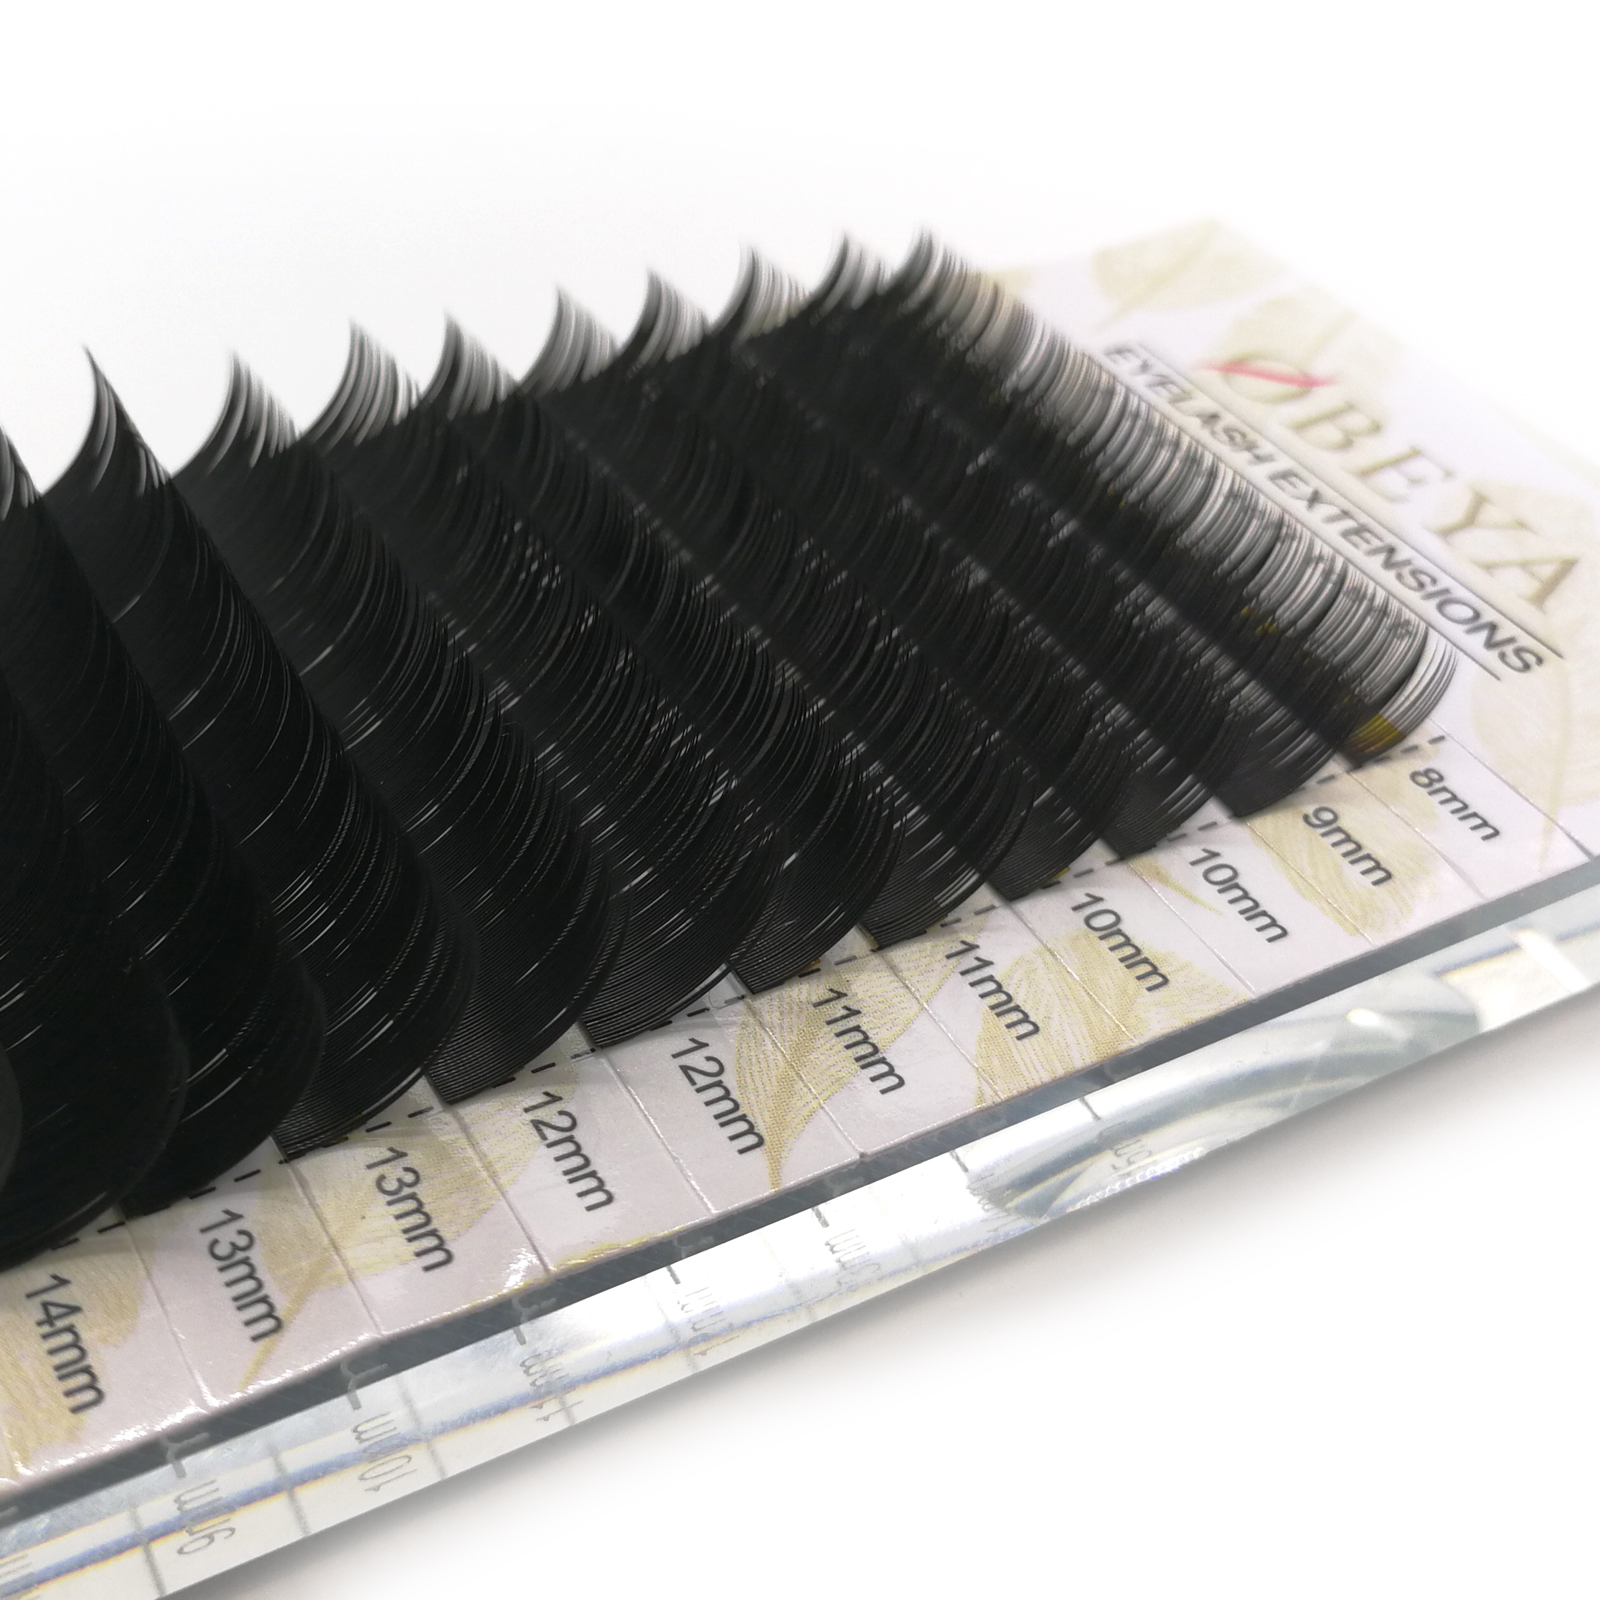 Russian Volume Lashes made of Korea PBT Fiber Customized Package and Private Label YY27